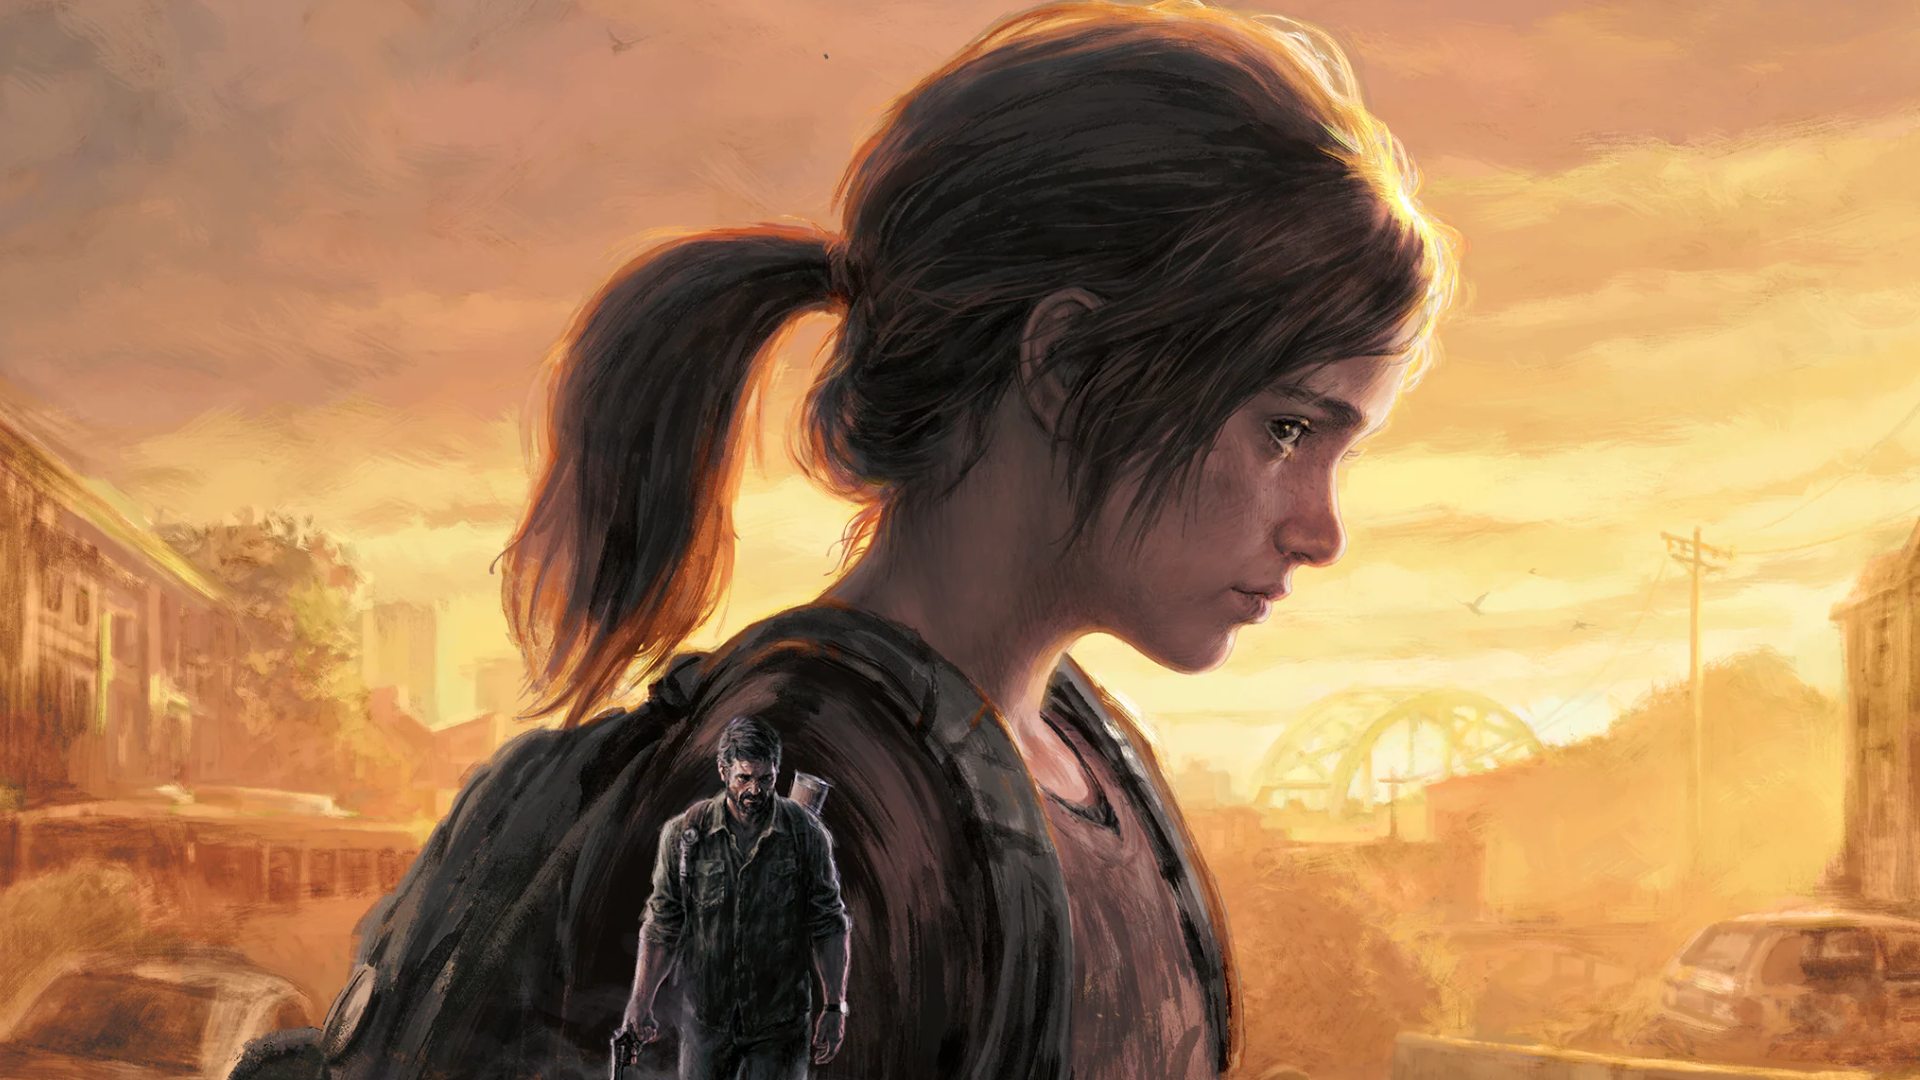 The best Last of Us settings: Artwork for Part 1 with Joel and Ellie